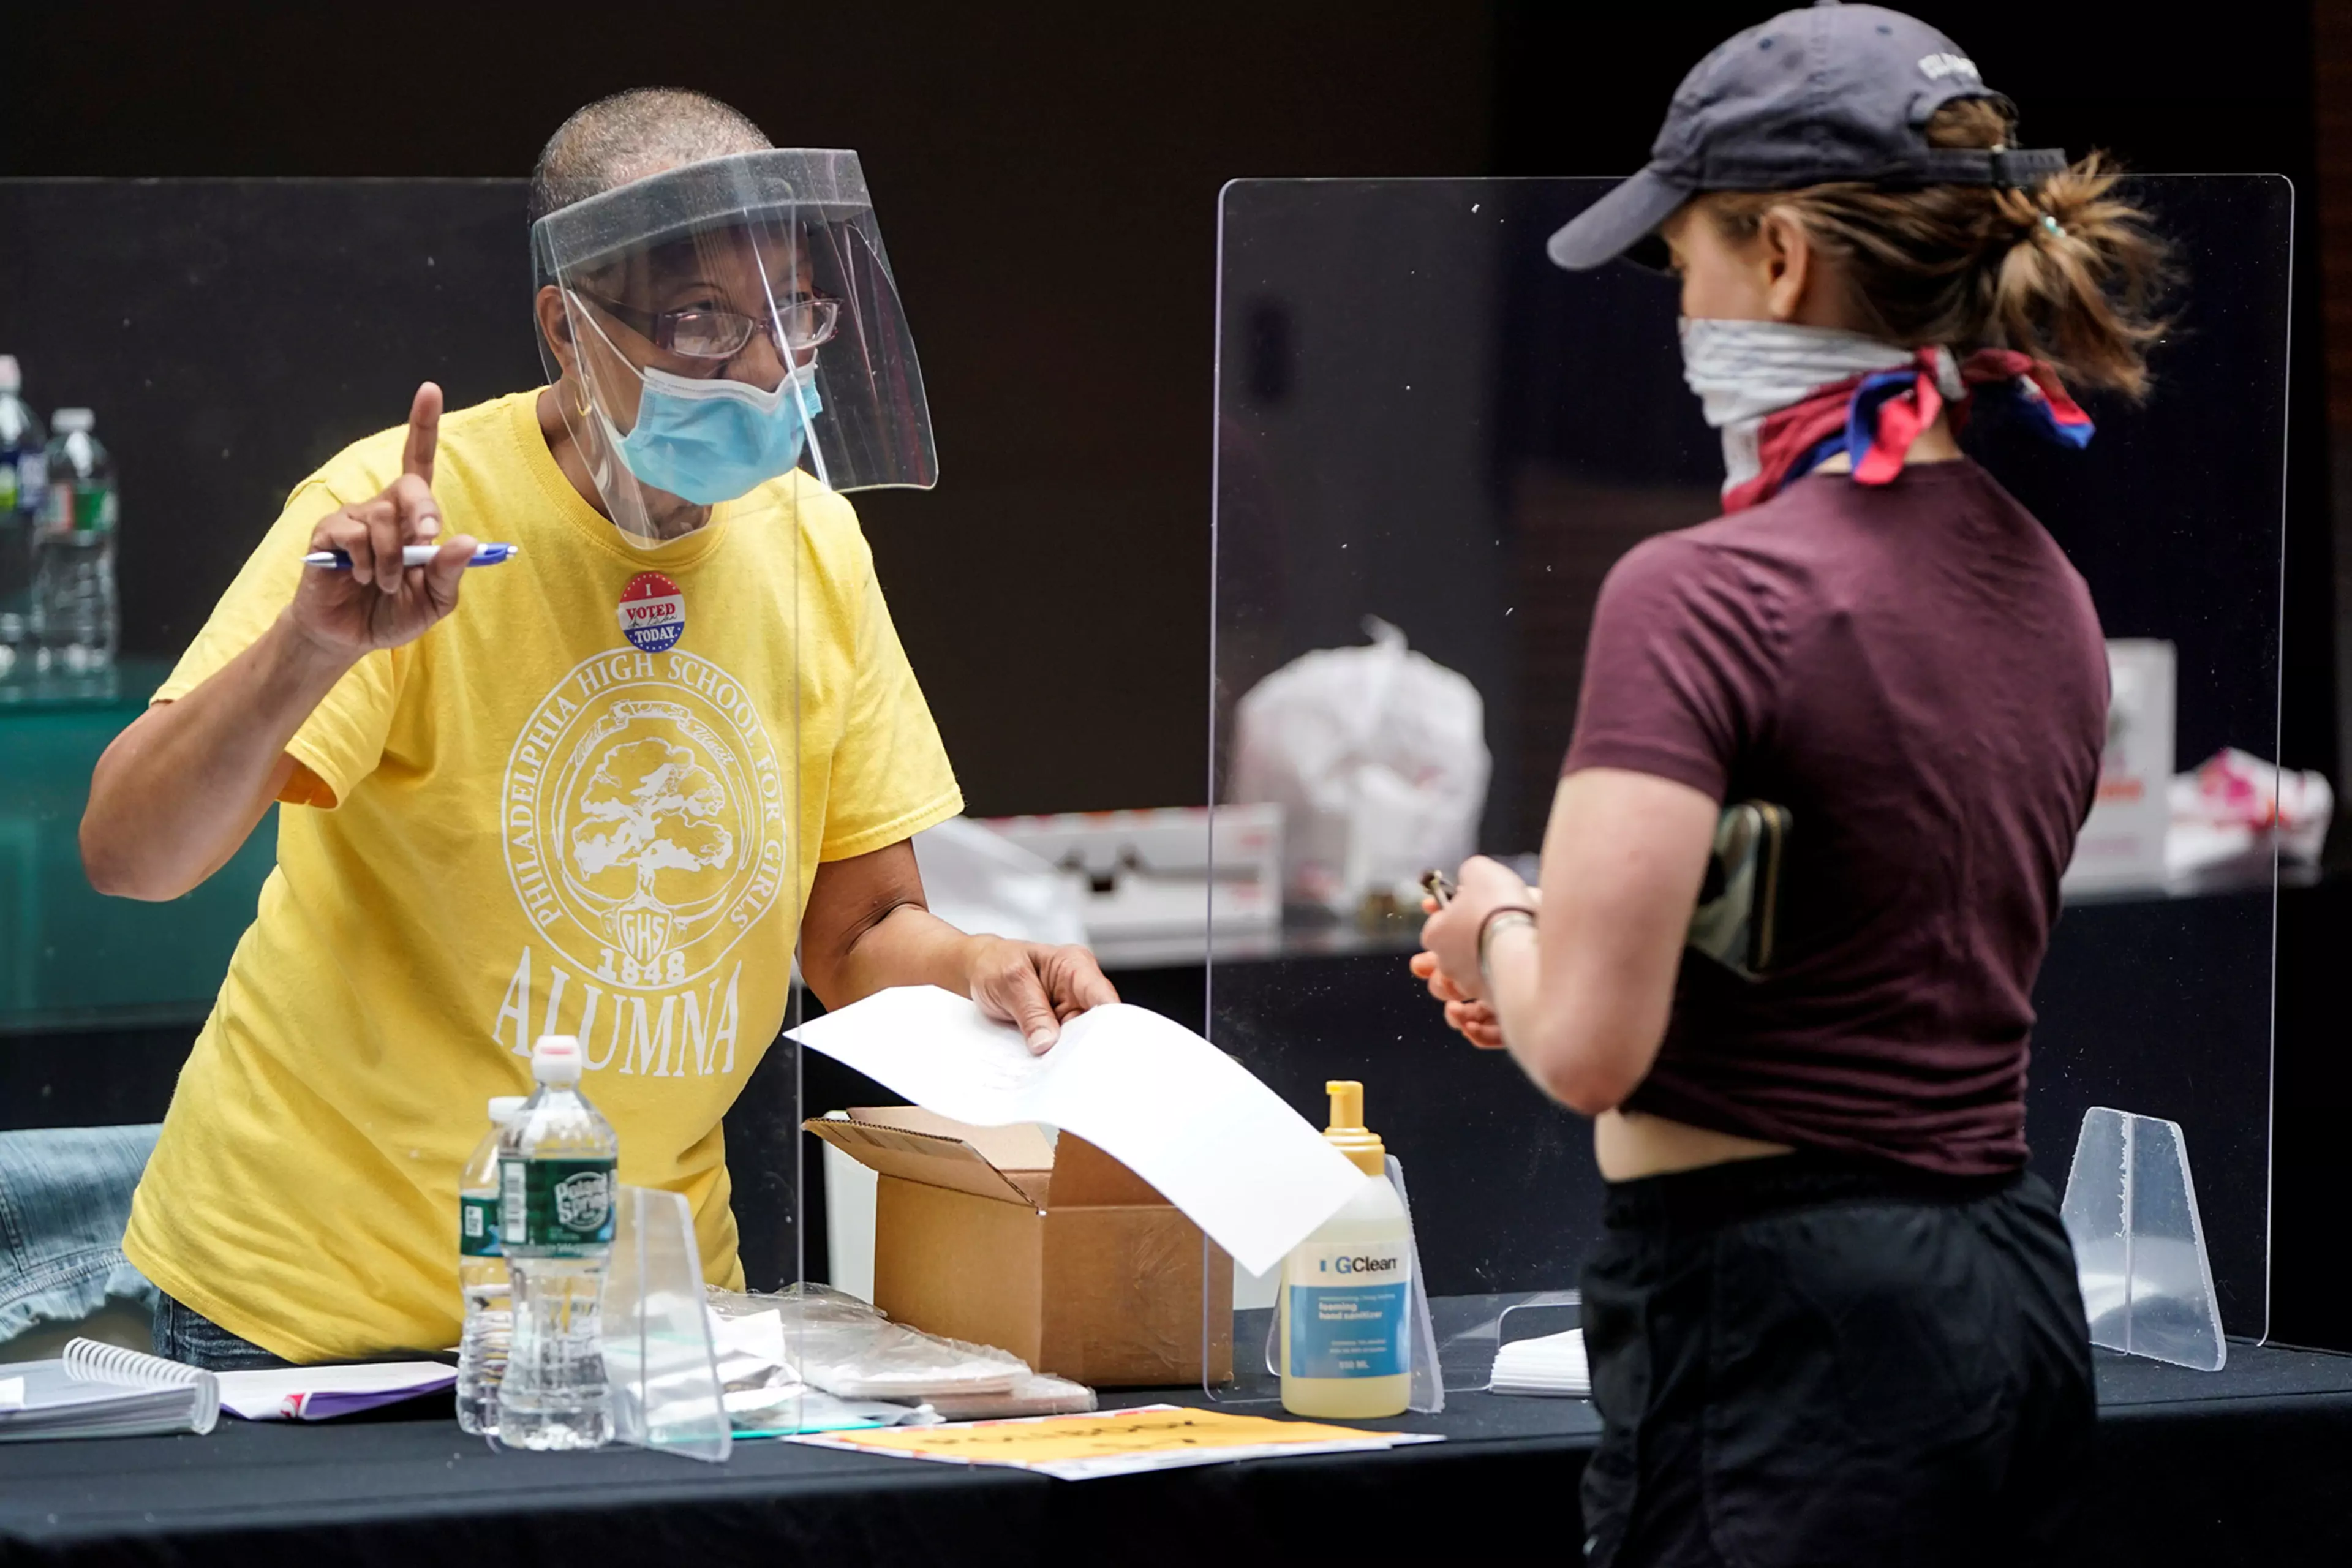 A poll worker and voter wear masks to prevent the spread of COVID-19 during a U.S. primary election.